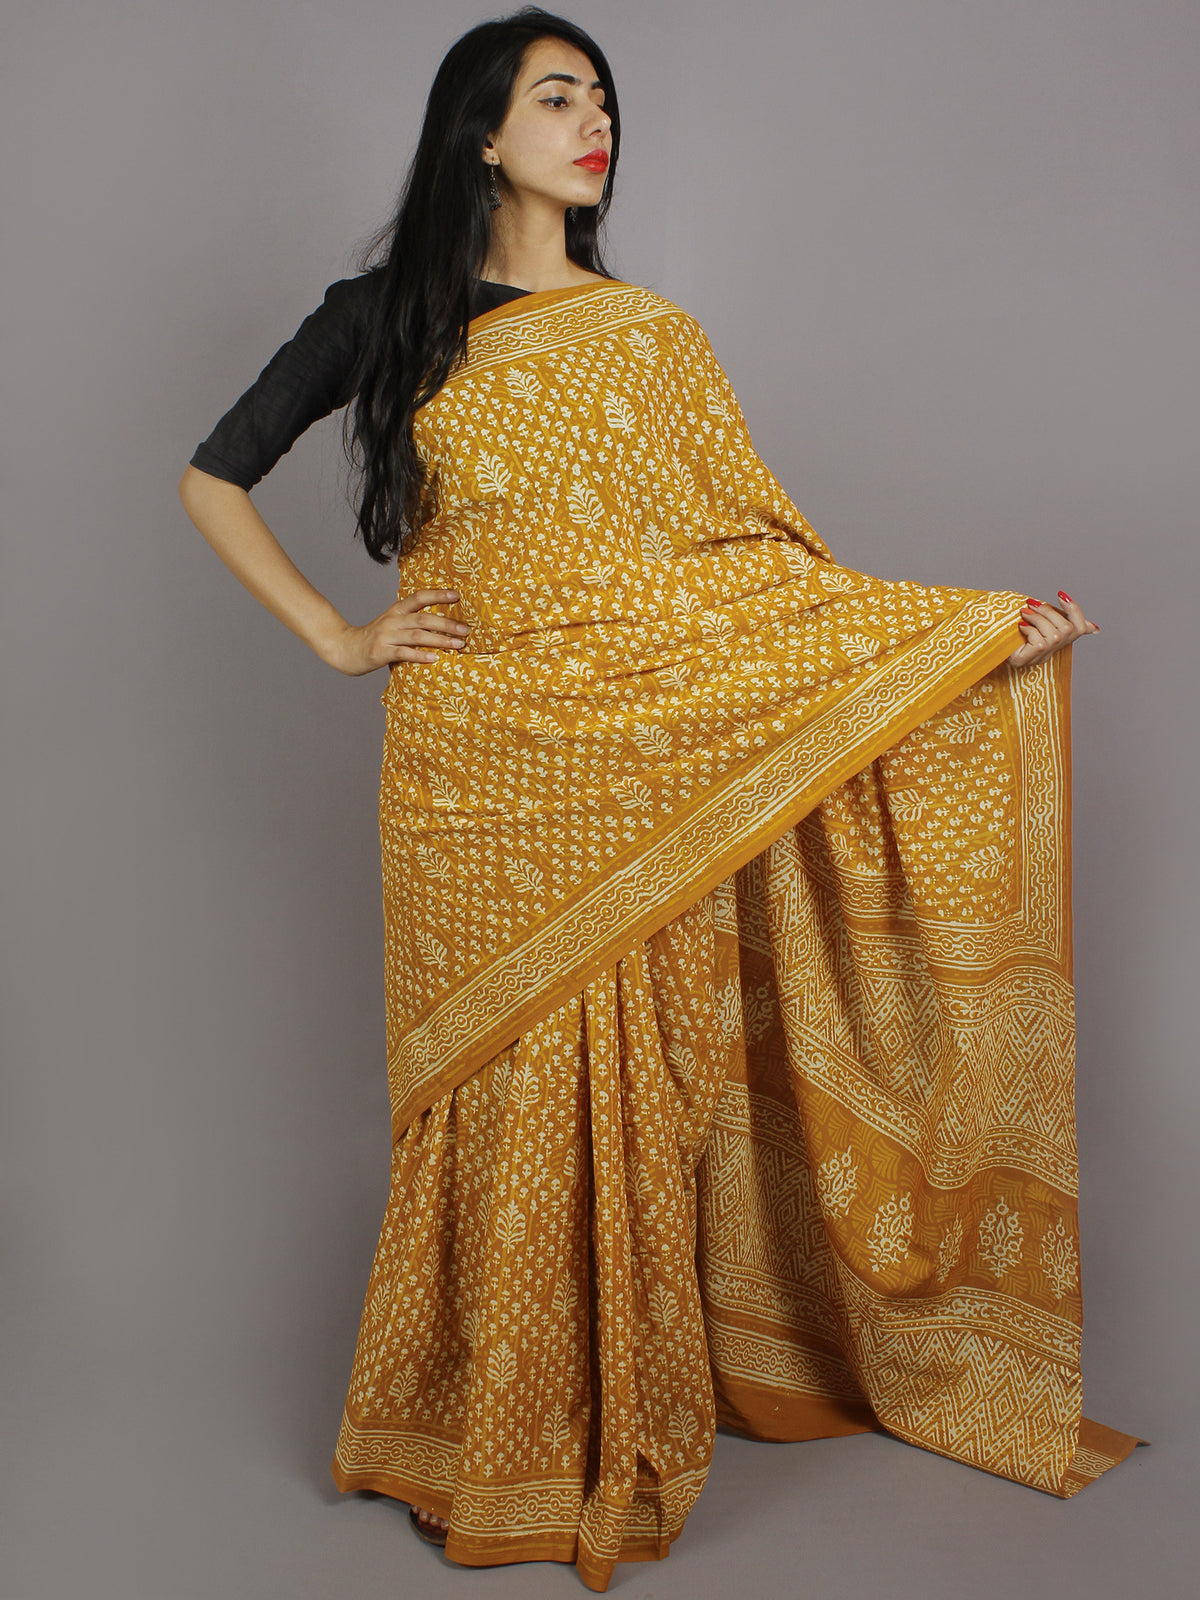 Mustard Yellow Ivory Hand Block Printed in Natural Colors Cotton Mul Saree - S031701230